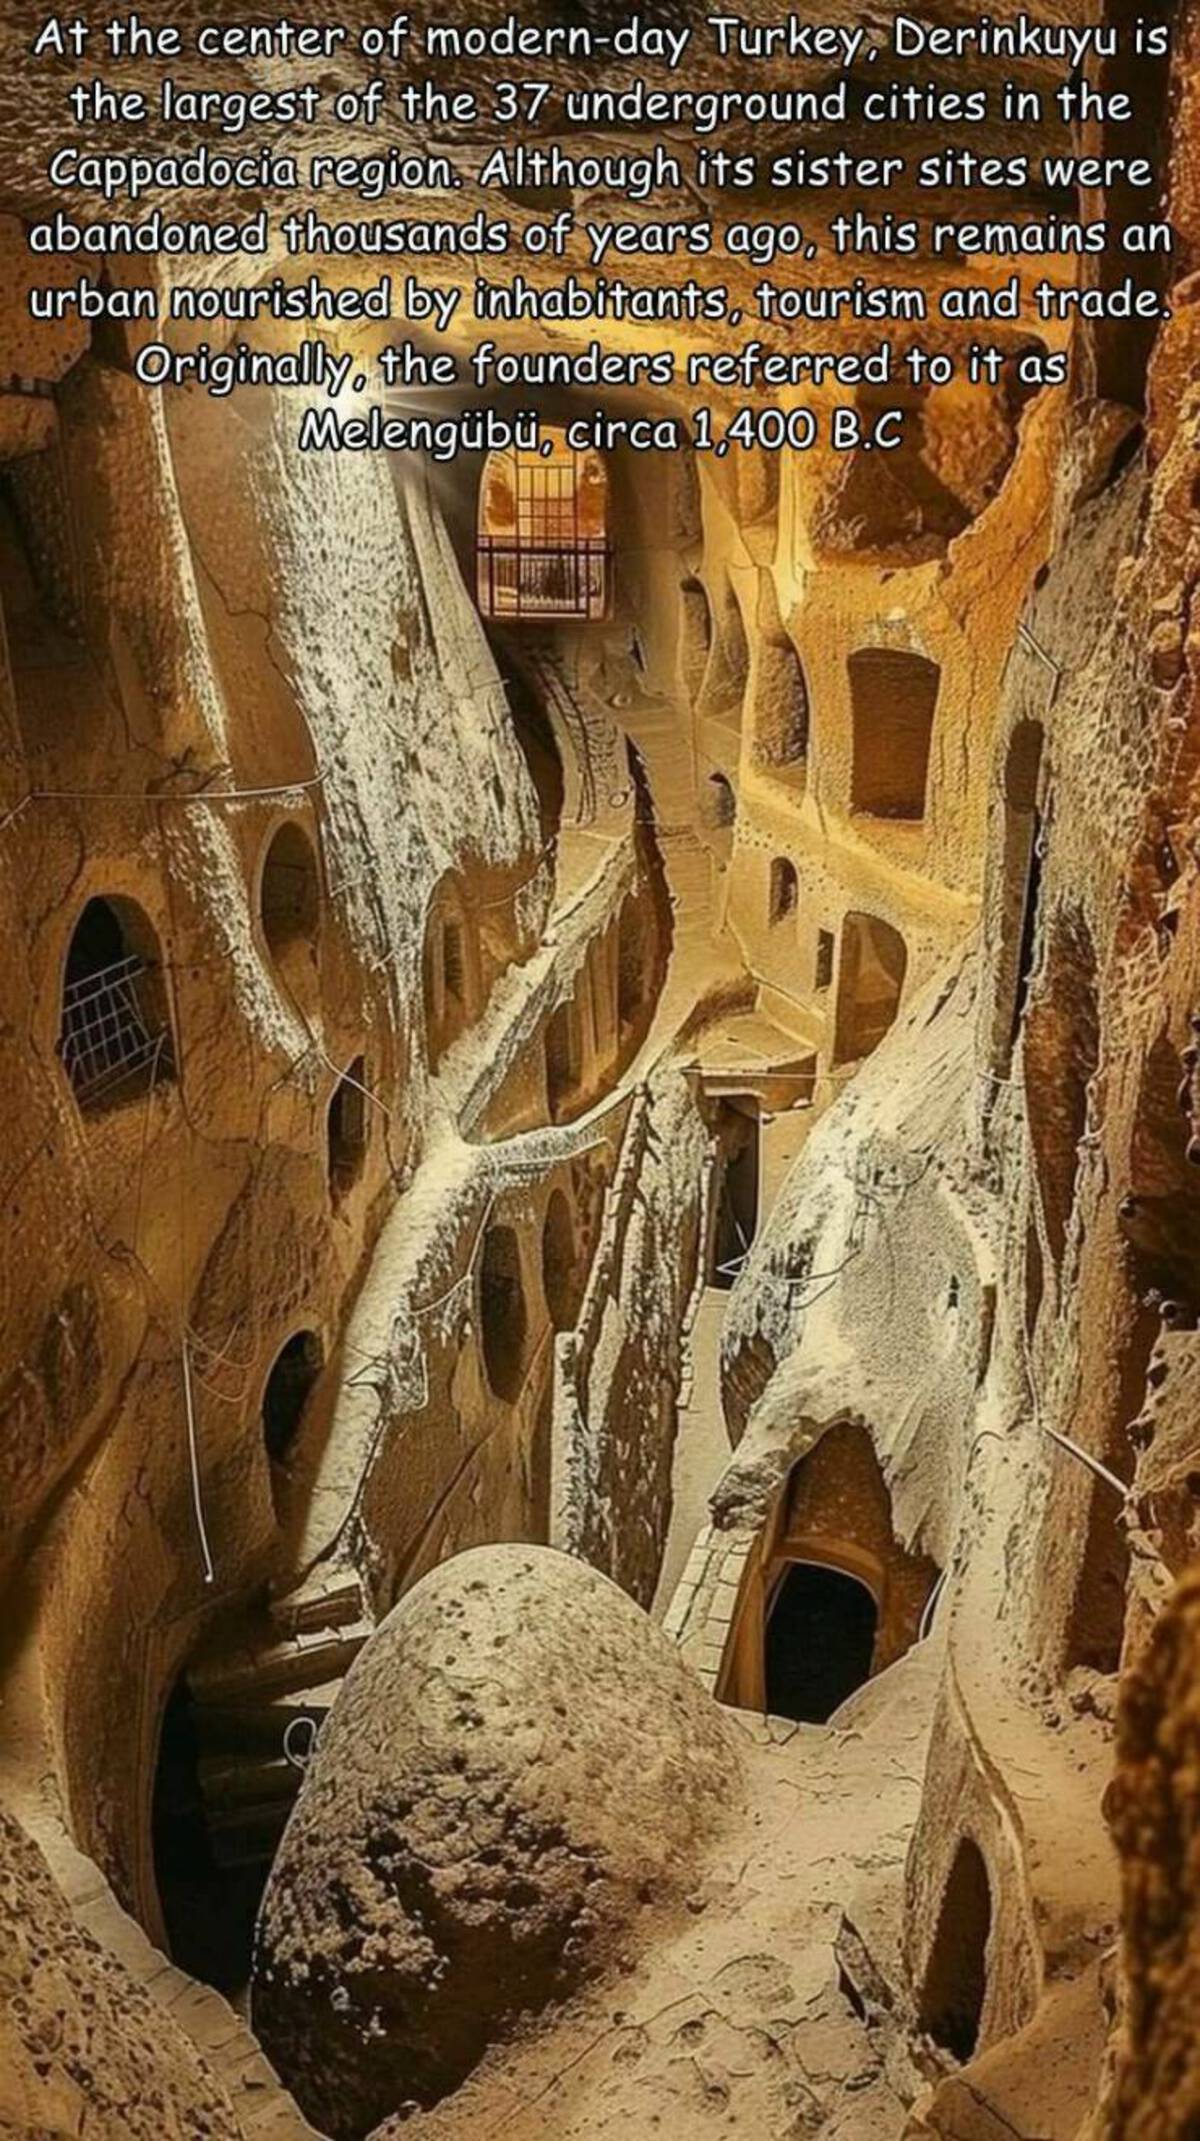 La Sagrada Familia - At the center of modernday Turkey, Derinkuyu is the largest of the 37 underground cities in the Cappadocia region. Although its sister sites were abandoned thousands of years ago, this remains an urban nourished by inhabitants, touris